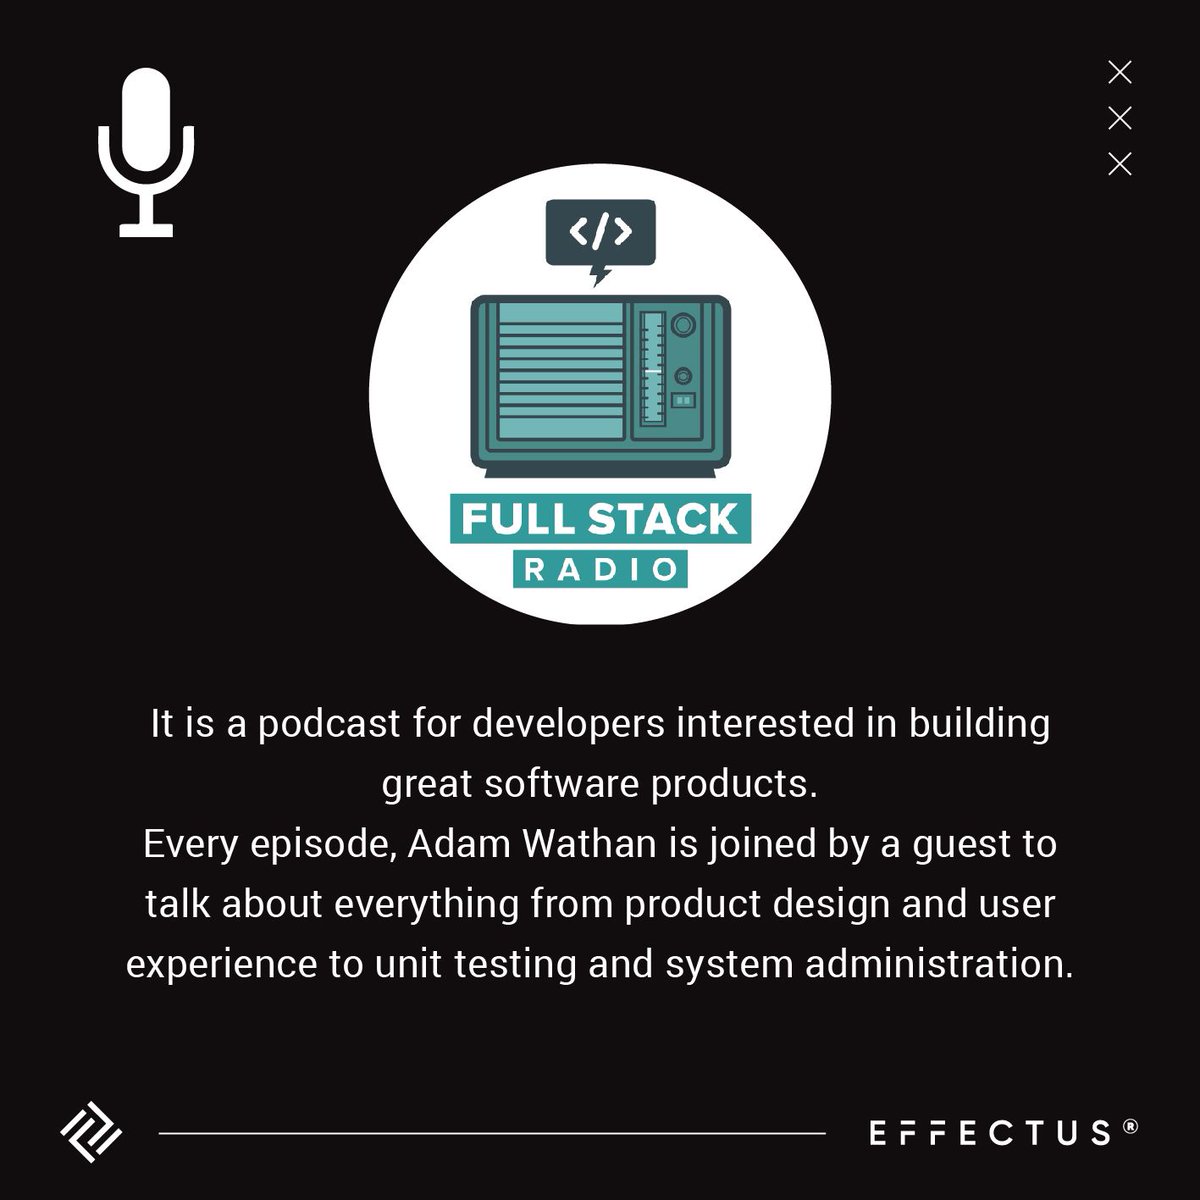 🎙🙌🏻 Podcasts are dominating the media landscape. They are not only an AWESOME learning tool, but they also: - are readily available and accessible - allow you to multitask - have a wide variety of topics - build communities and more! #effectus #effectussoftware #keeponcoding